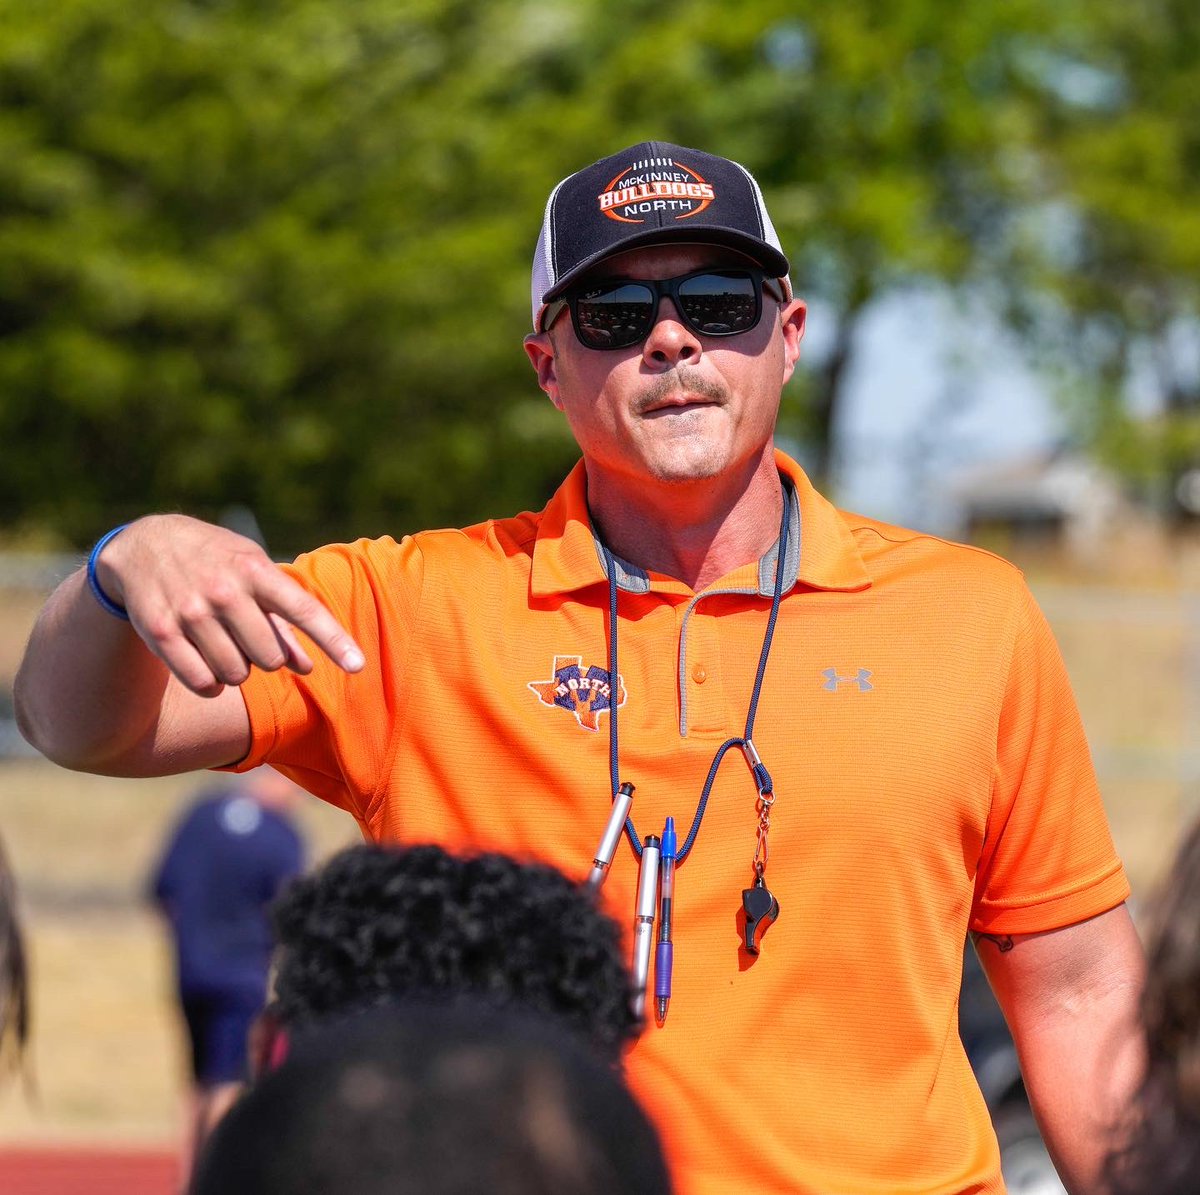 Shoutout to all the head ball coaches in McKinney ISD on National Coaches Day. Thank you for all you and your staffs do for our kids. 

#mckinneytx #mckinneyisd #footballcoaches #coaches #leadership #mentorship #nationalcoachesday